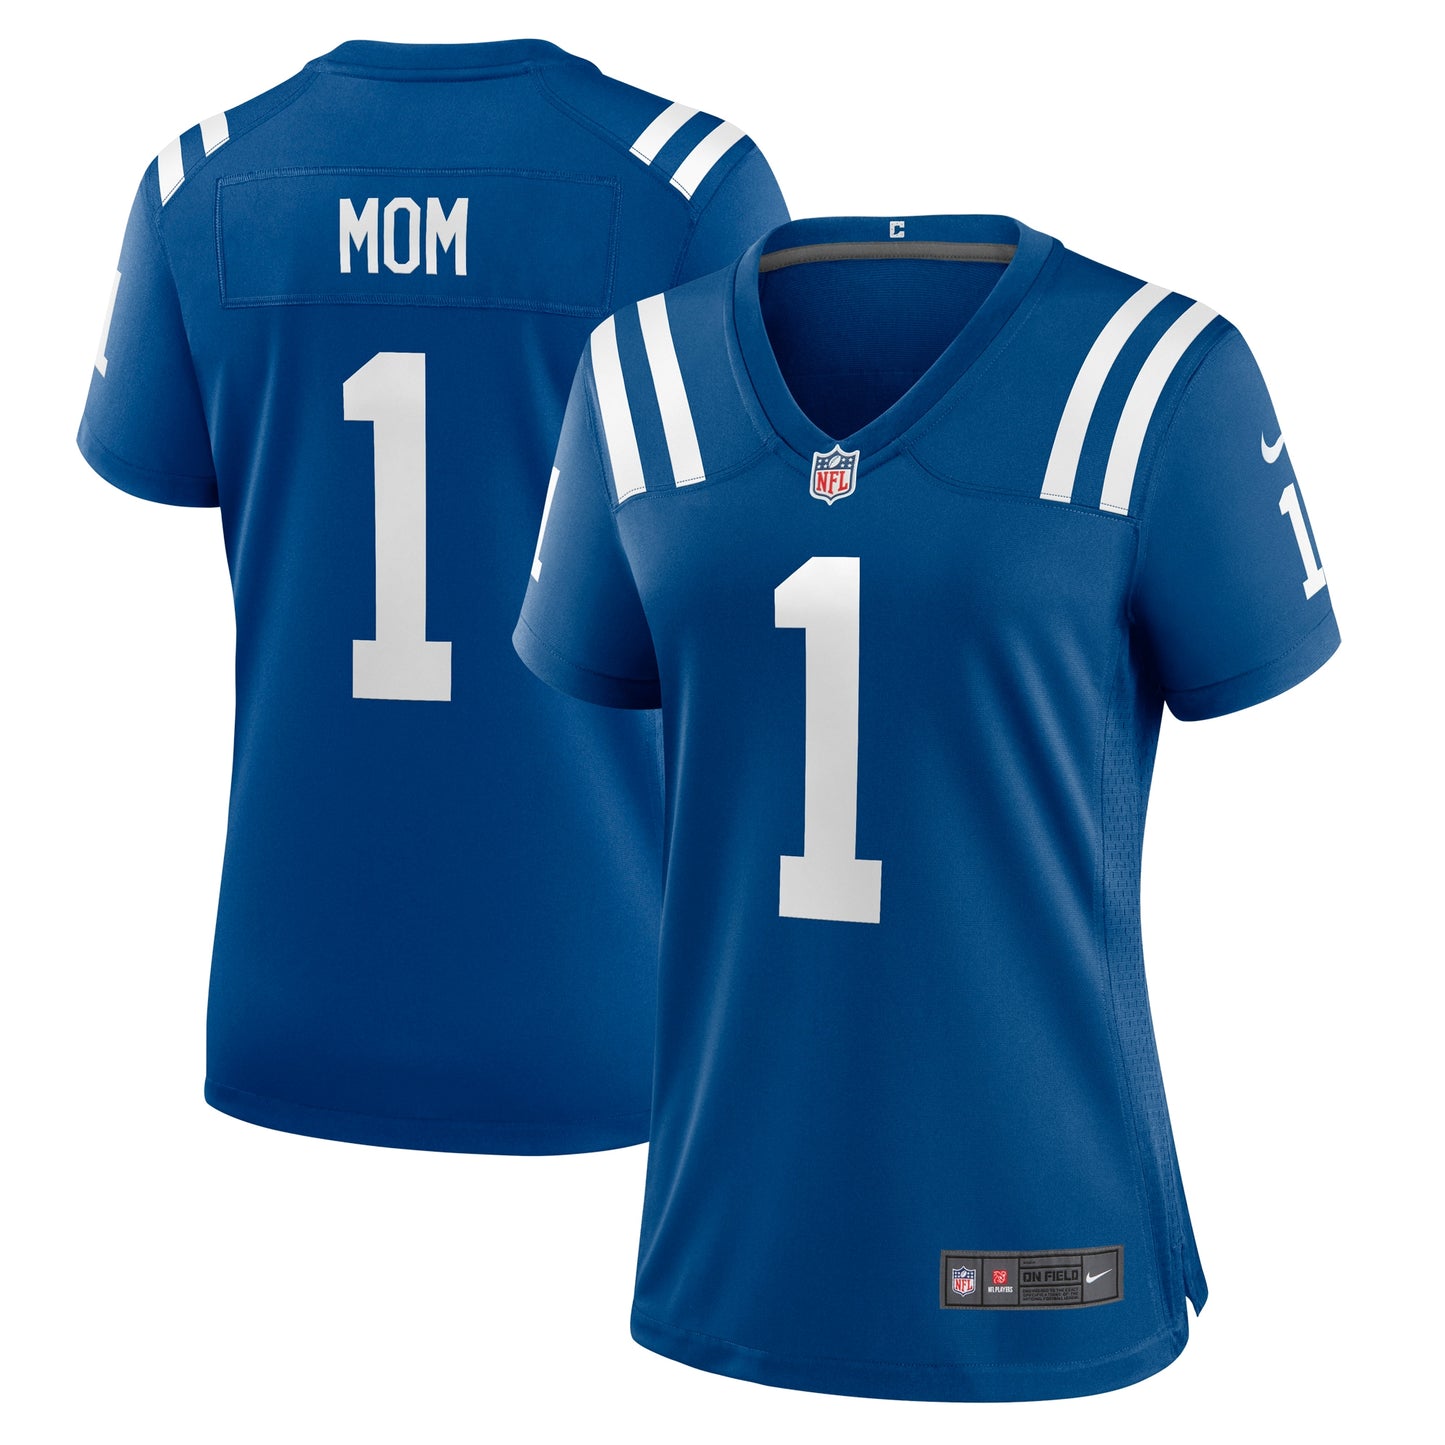 Number 1 Mom Indianapolis Colts Nike Women's Game Jersey - Royal